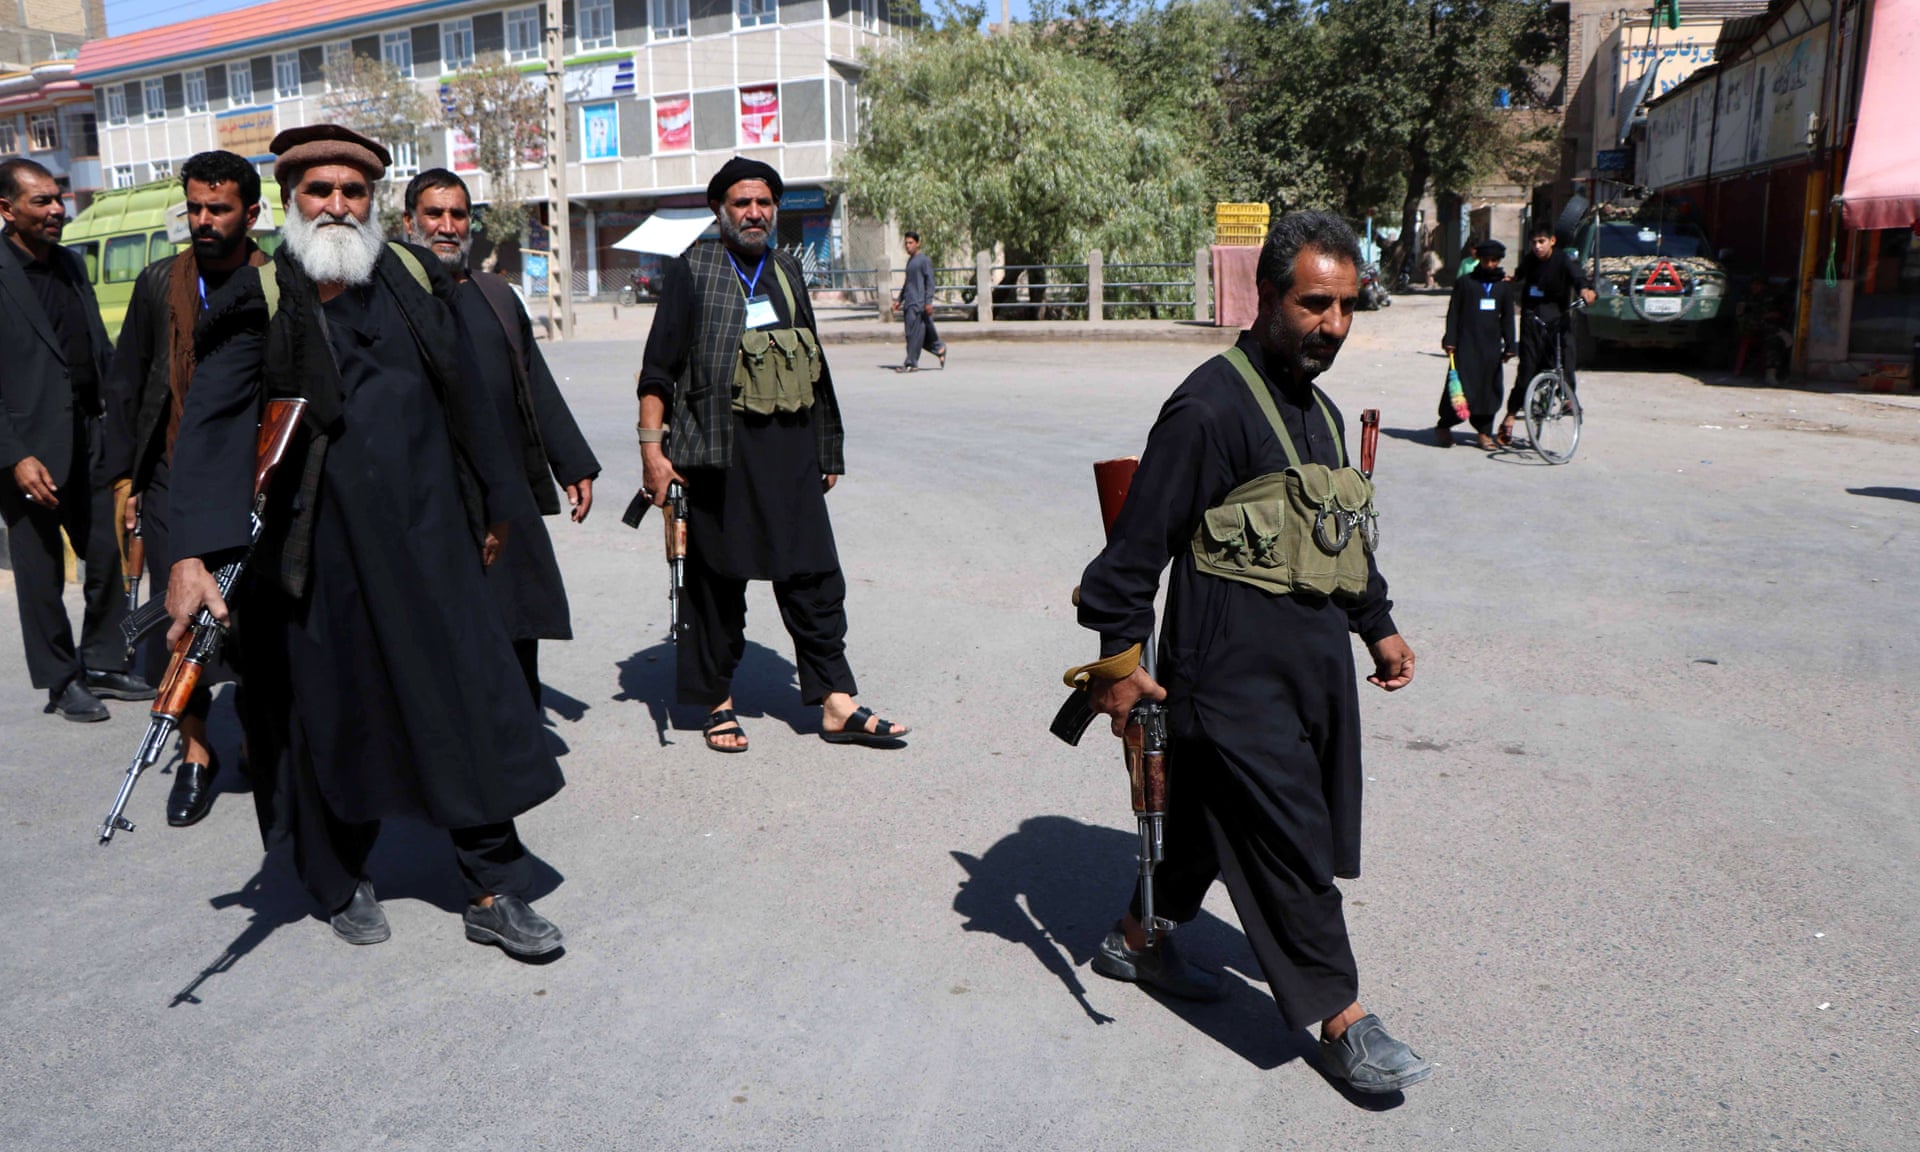 'Isis will be looking for targets': guns and fear mark Afghan Ashura